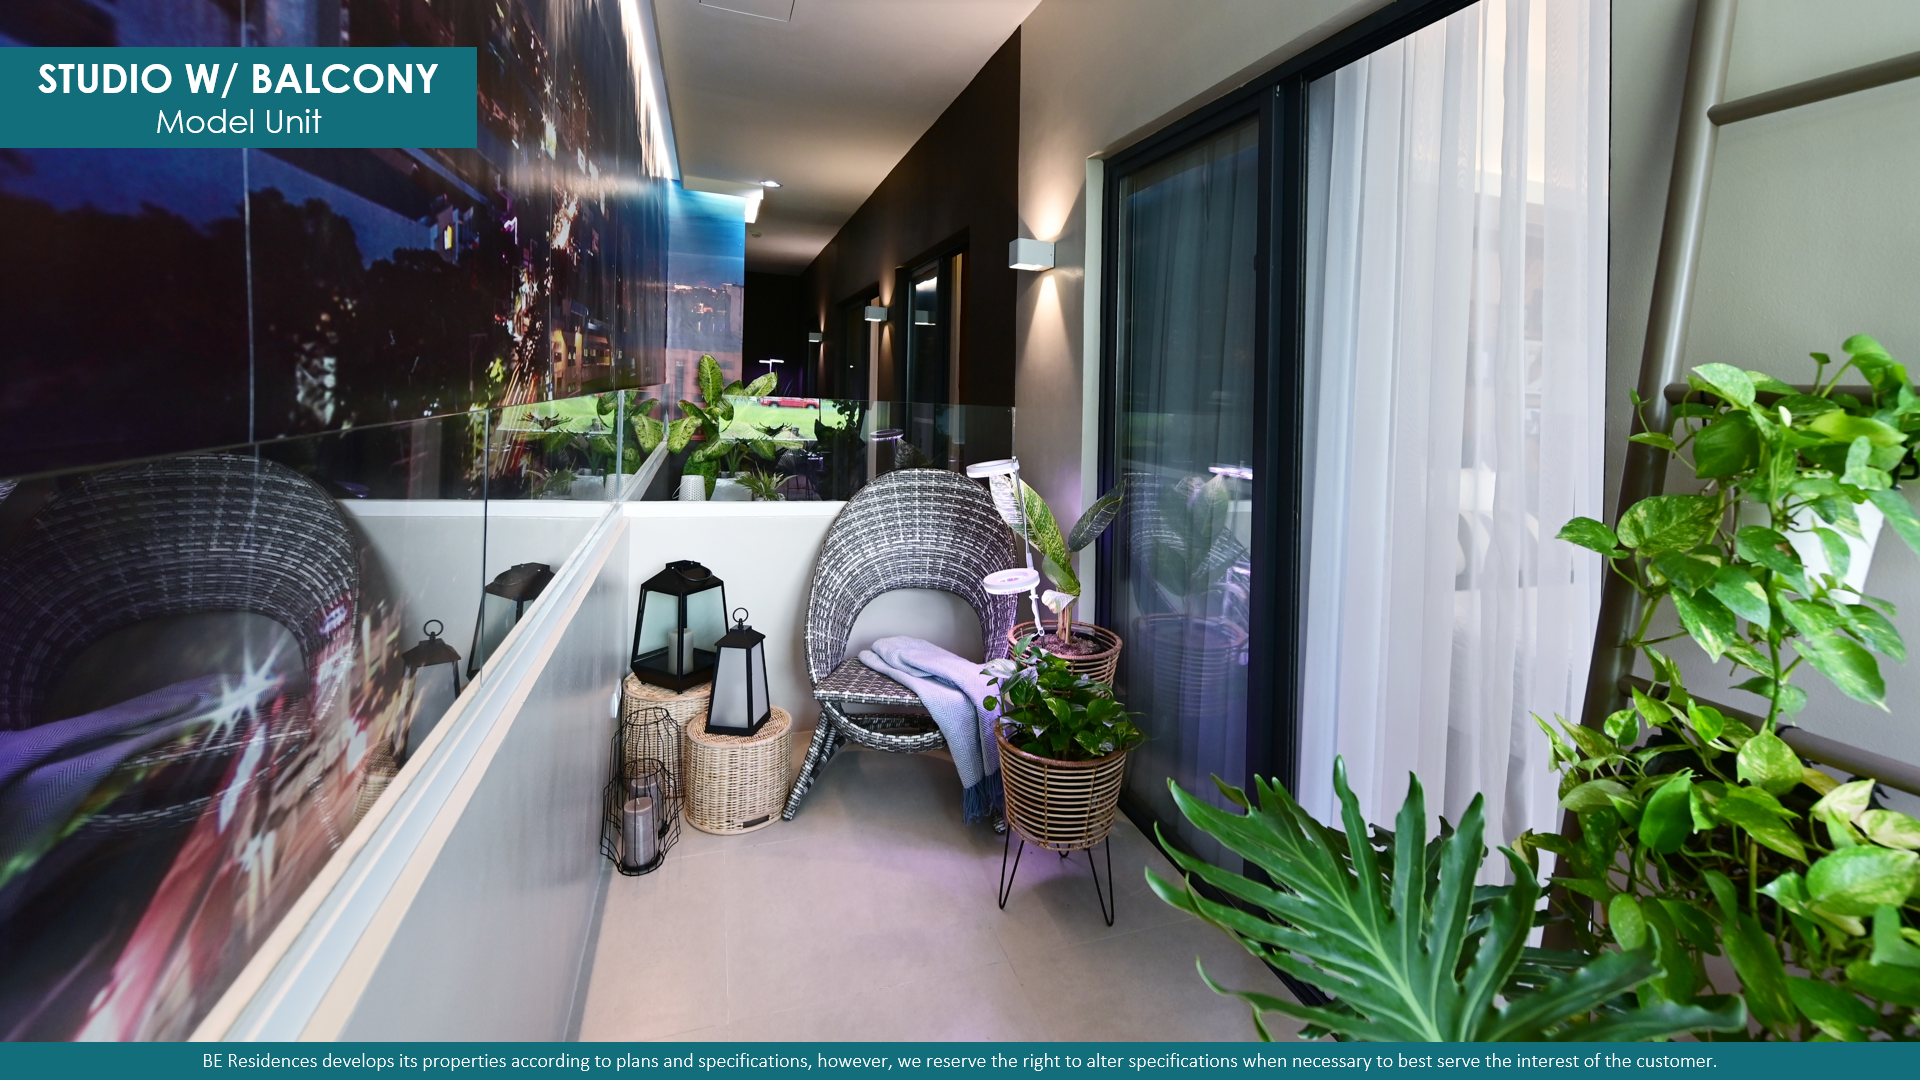 Studio Condo Unit in Be Residences Lahug Redefining City Living with Be Residences Lahug A 20-level residential condominium is located minutes from Cebu I.T. Park with easy and convenient access to business districts, hospitals, transport hubs, and schools.